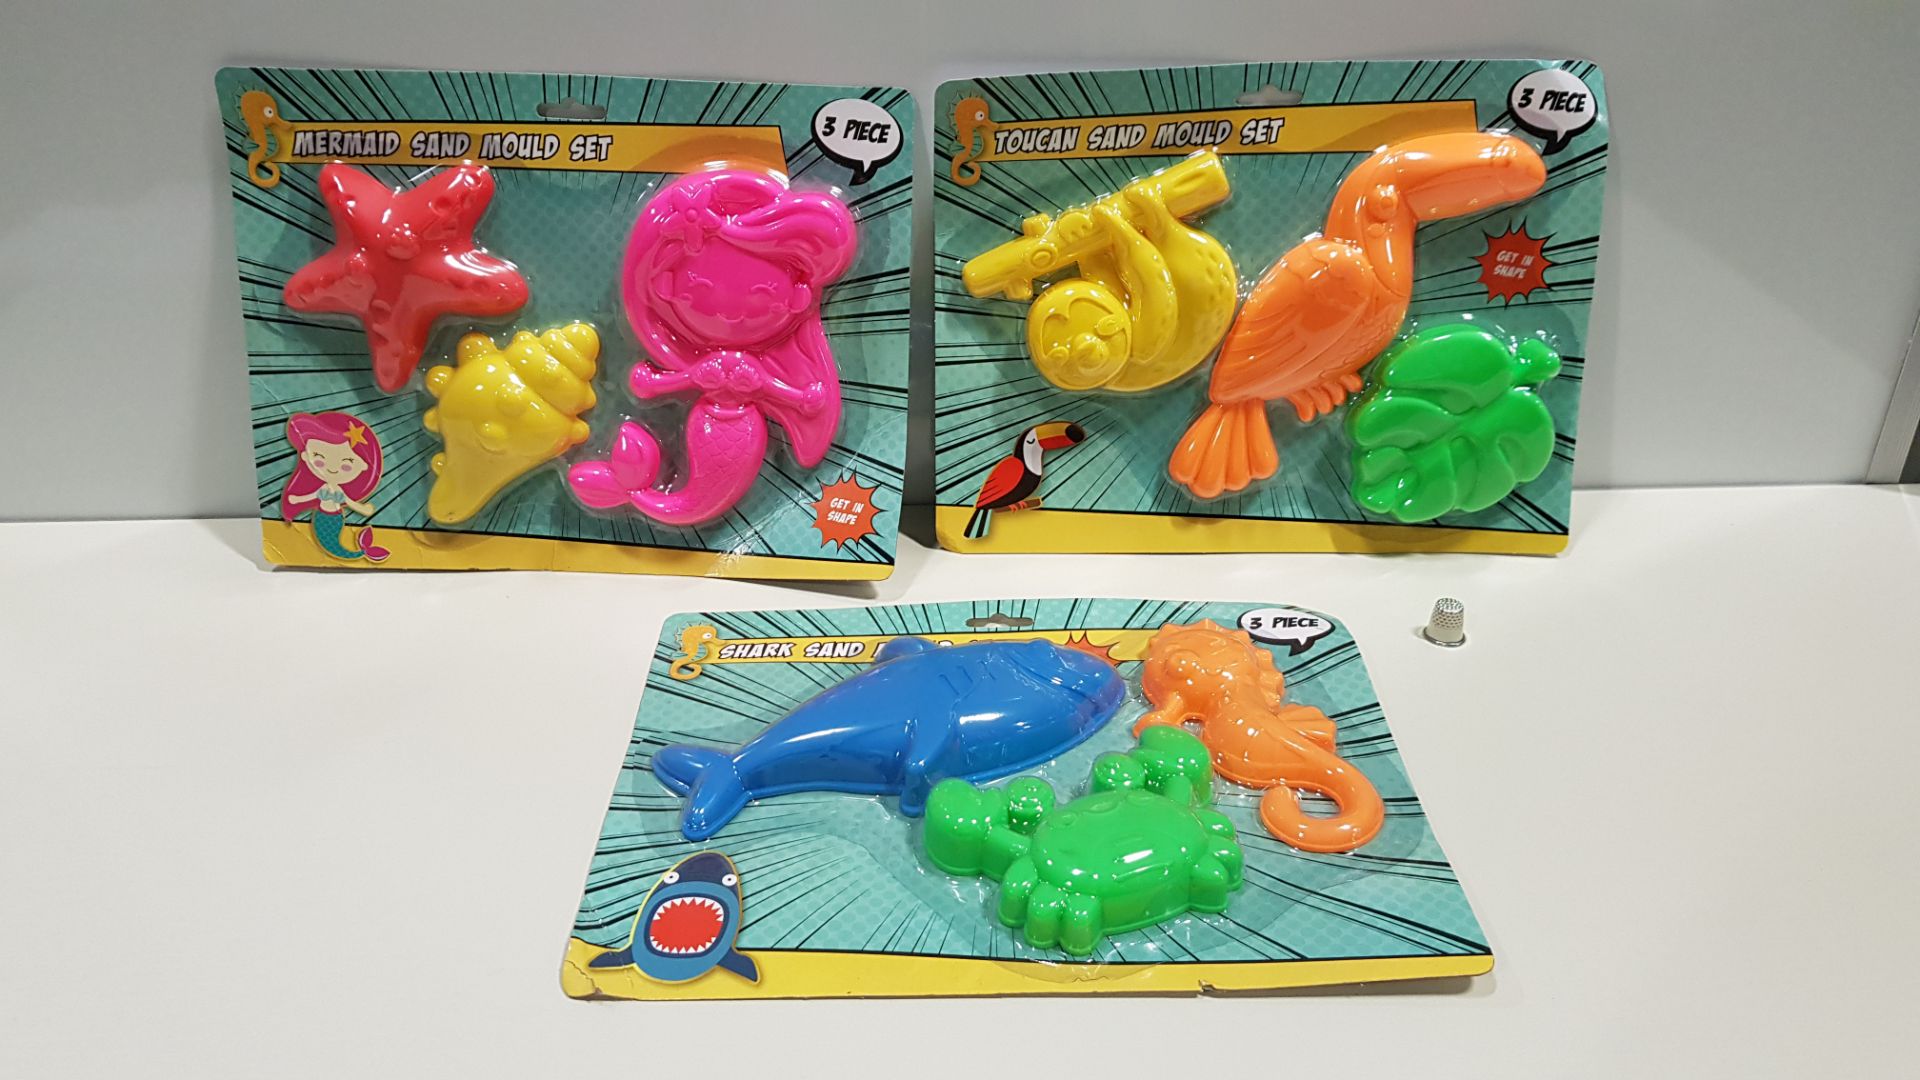 168 X BRAND NEW OUTDOOR SAND MOULD SETS OF 3 TOYS IN MERMAID / SHARK & TOUCAN THEMES - IN 12 BOXES